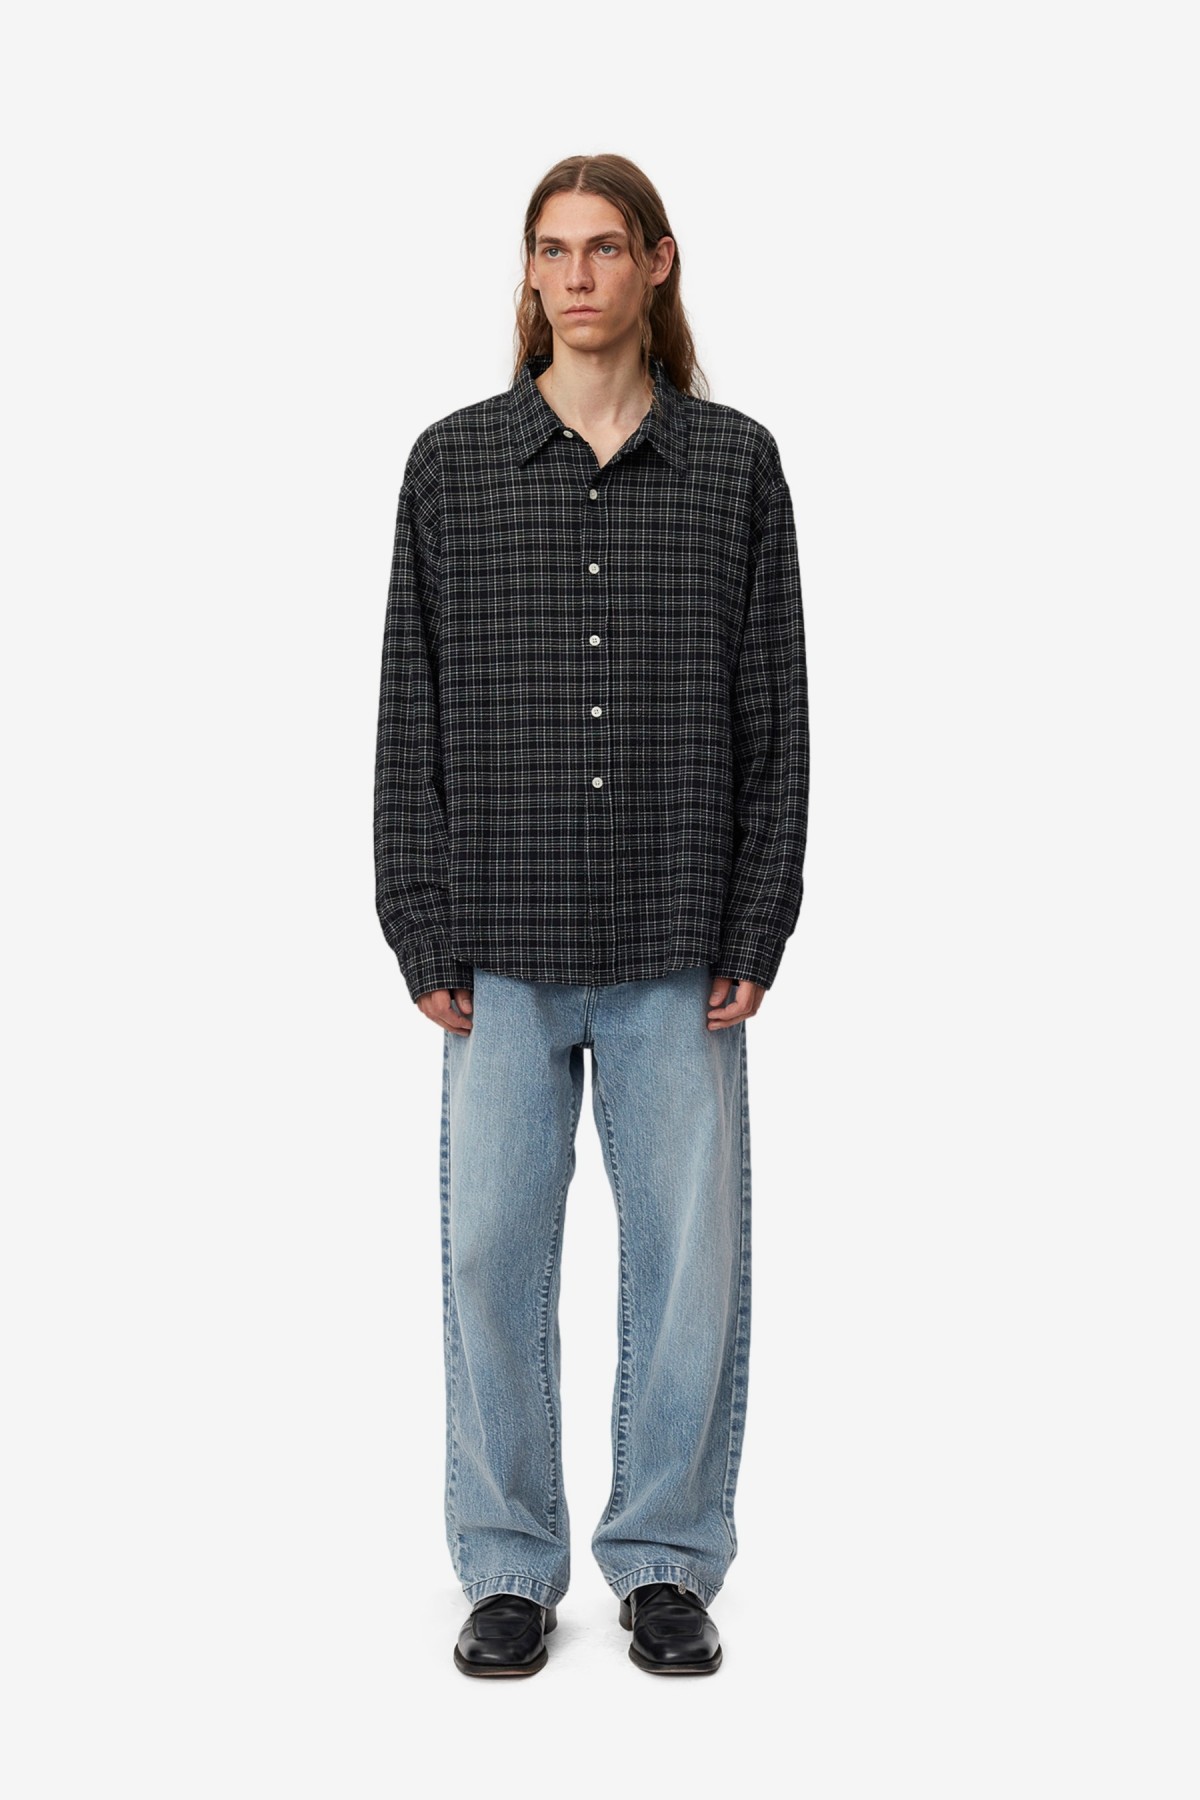 mfpen Vacation Shirt in Black Check